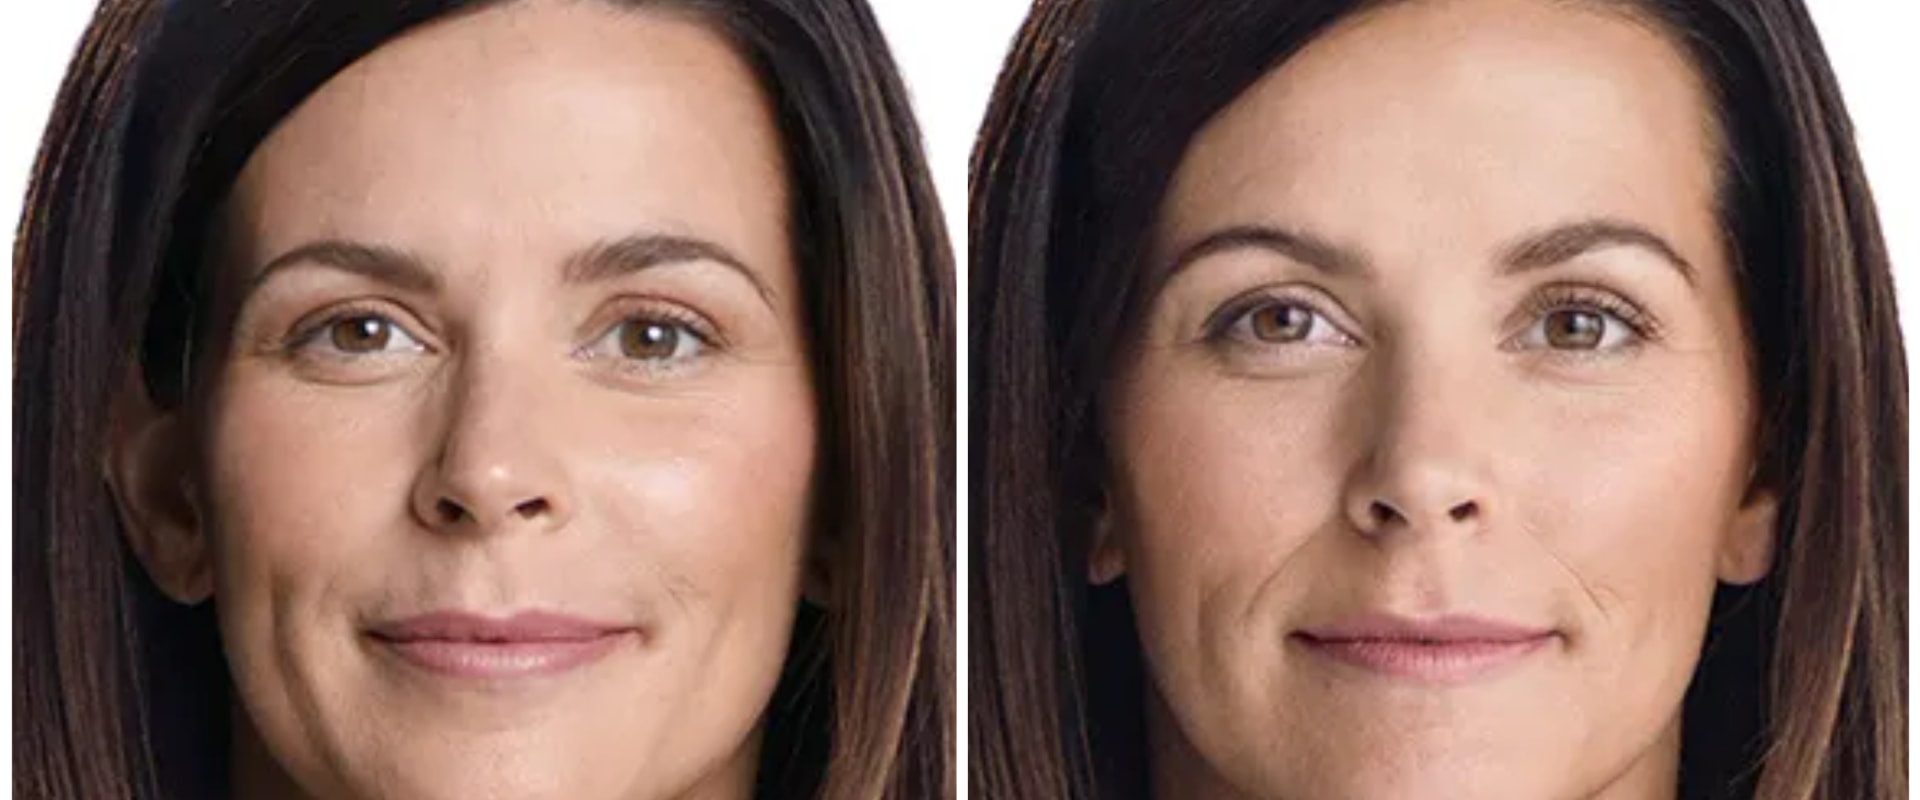 Are Juvederm Fillers Safe? An Expert's Perspective